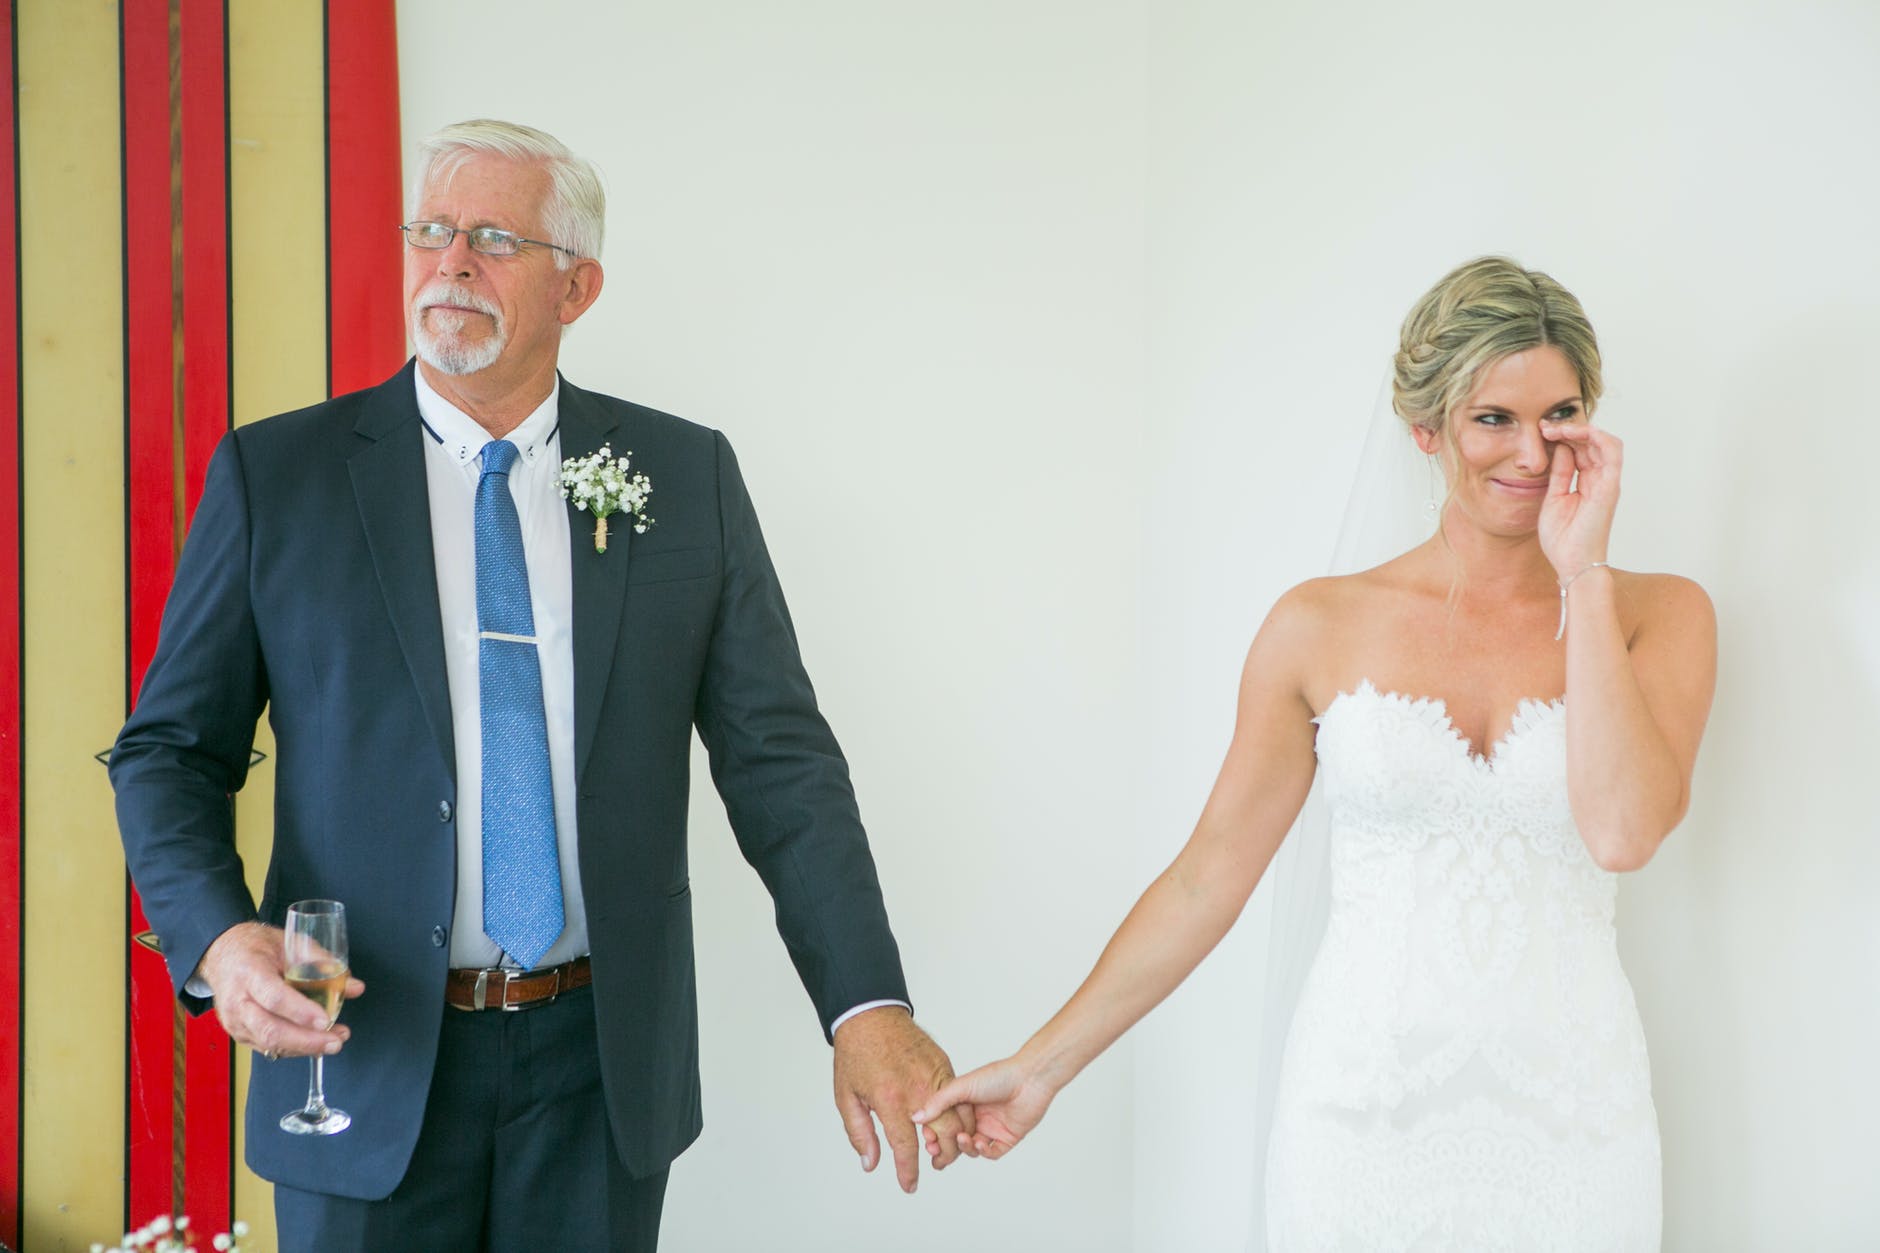 Bob walked her down the aisle years later. | Source: Pexels